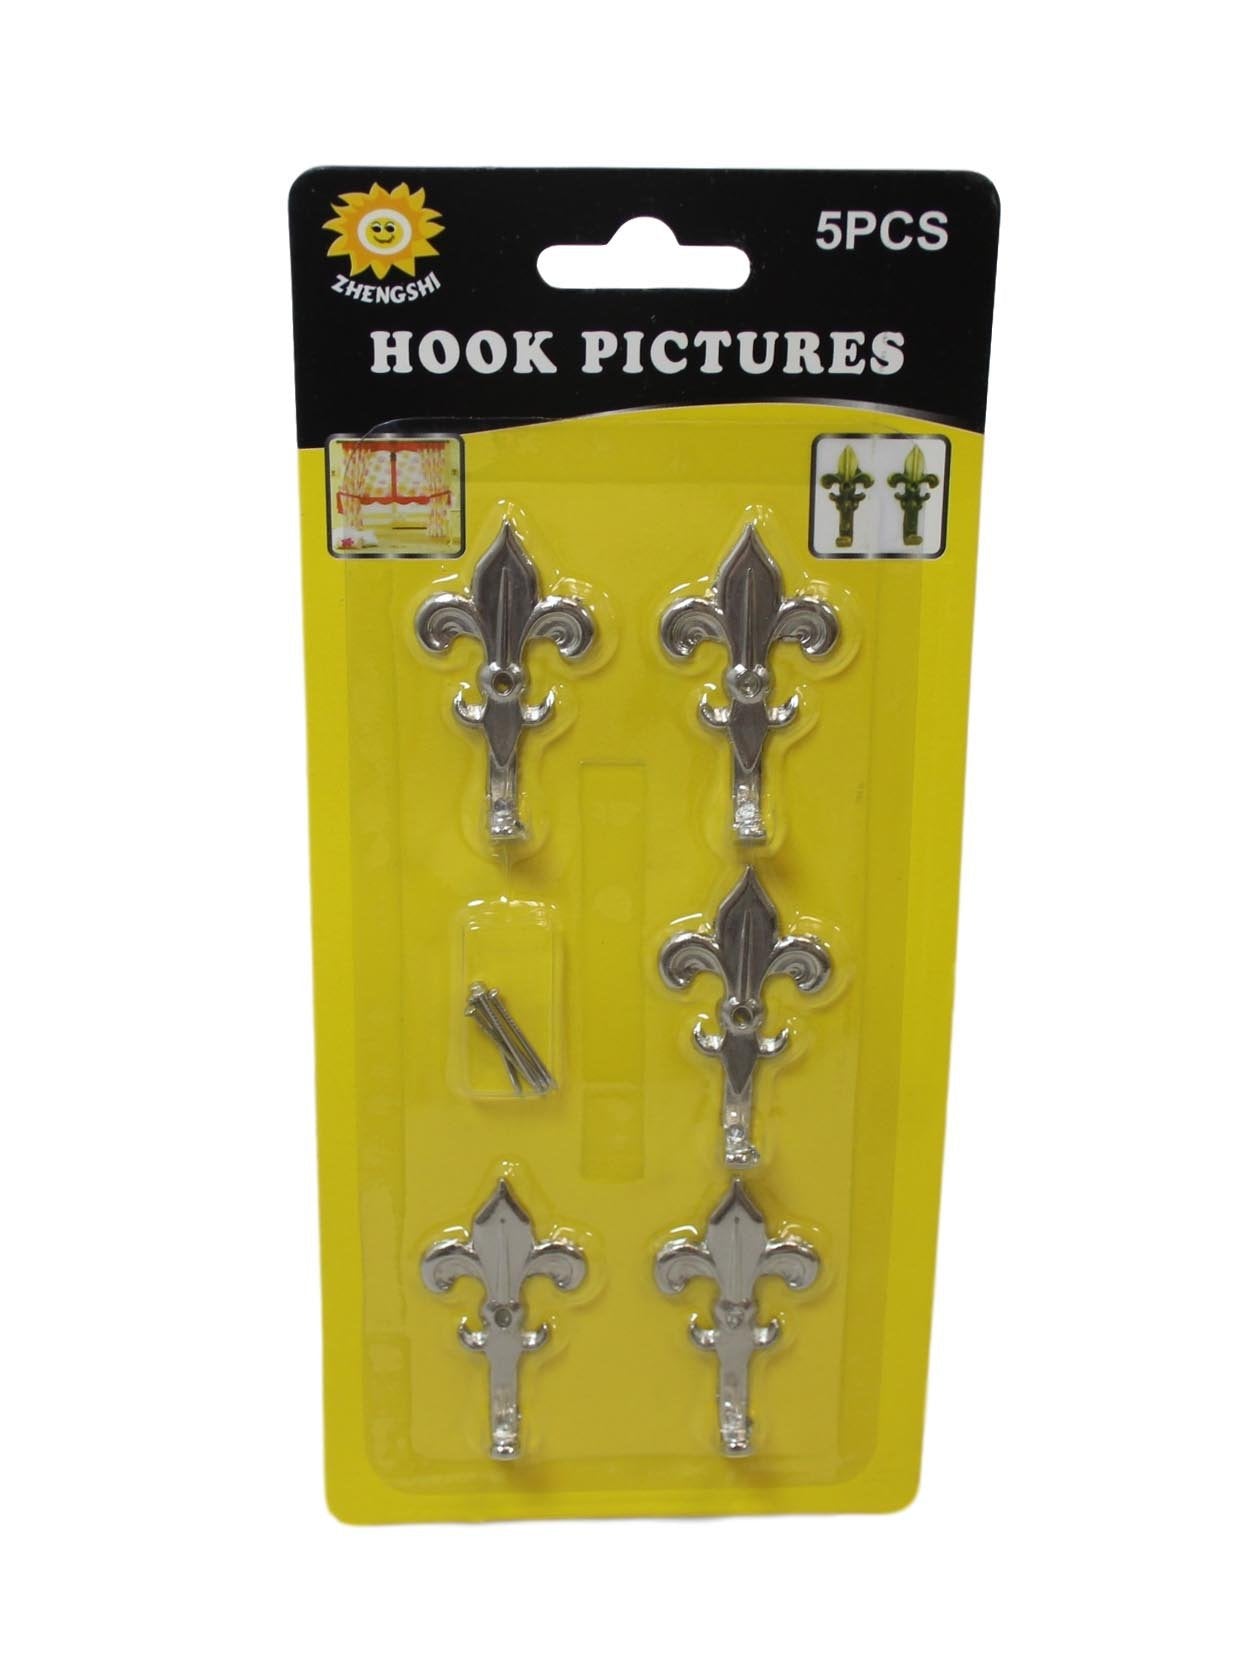 5 Pack Chrome Mini Picture Curtain Hooks With Nails 3cm 6002 (Large Letter Rate)